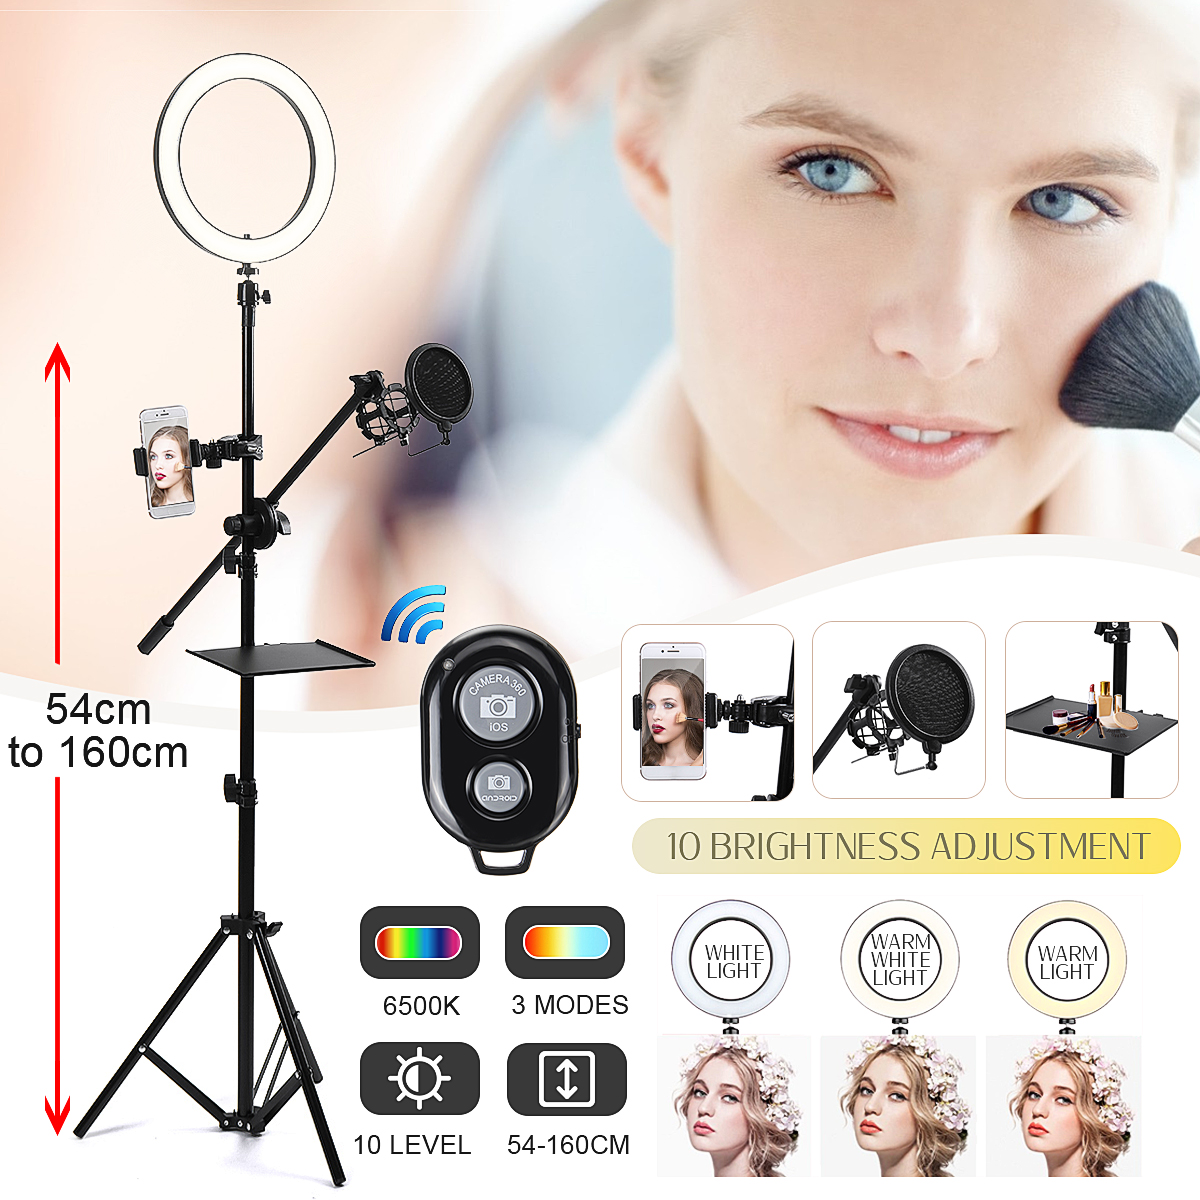 1625cm-Dimmable-LED-Video-Ring-Light-Tripod-Stand-with-PhoneMic-Holder-bluetooth-Selfie-Shutter-for--1610611-1